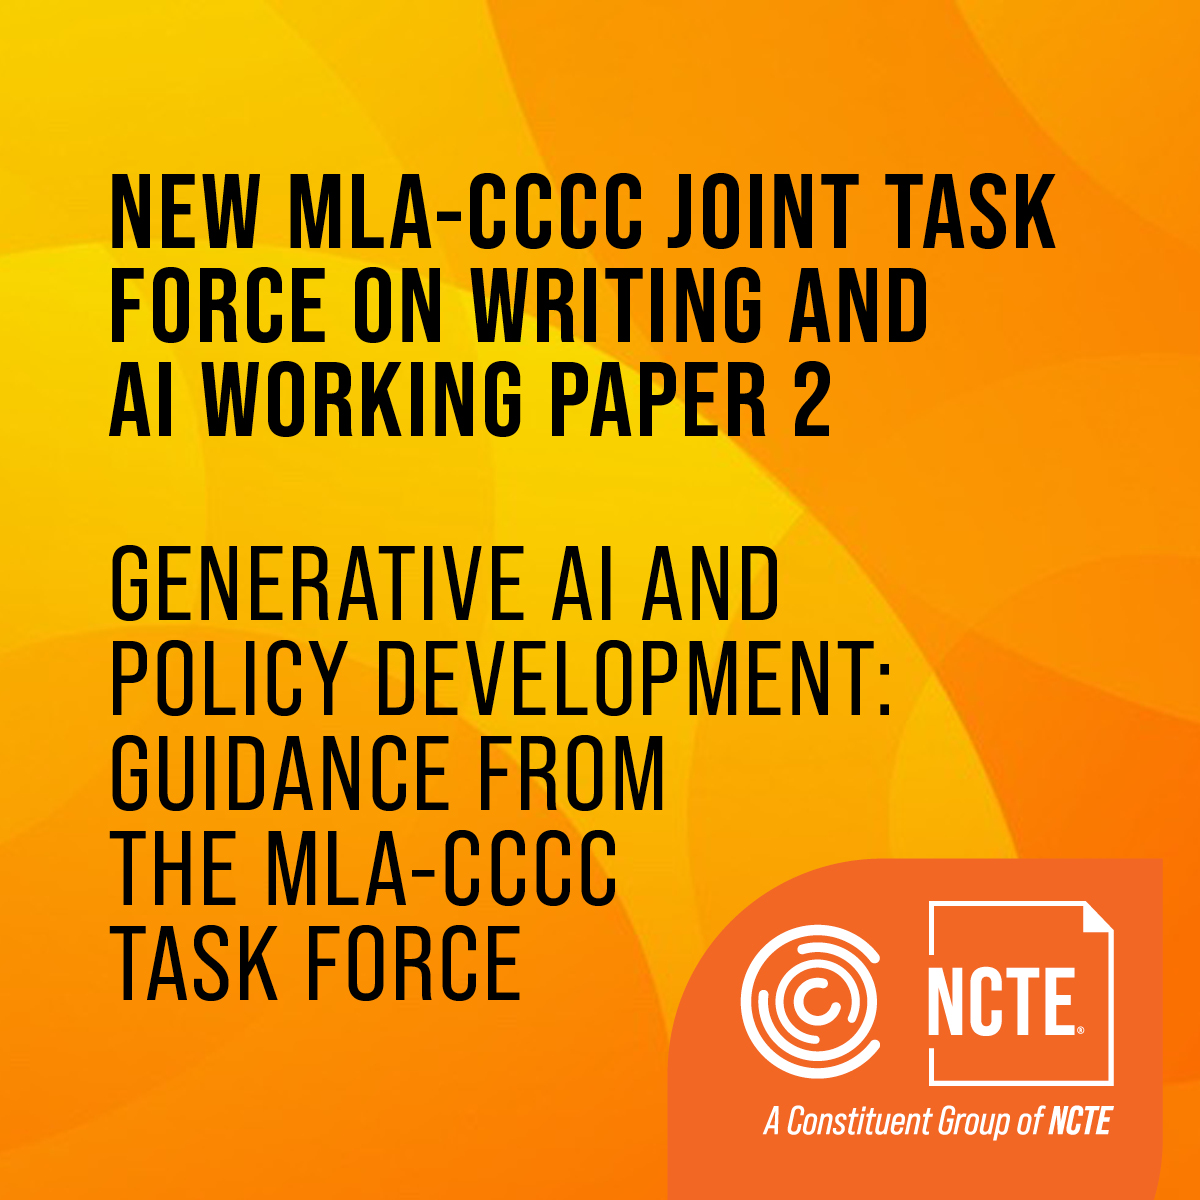 The @ncte_cccc and @MLANews Joint Task Force on Writing and AI has released a second working paper which provides guidance on developing policy for generative AI. Read it now: cccc.ncte.org/mla-cccc-joint…